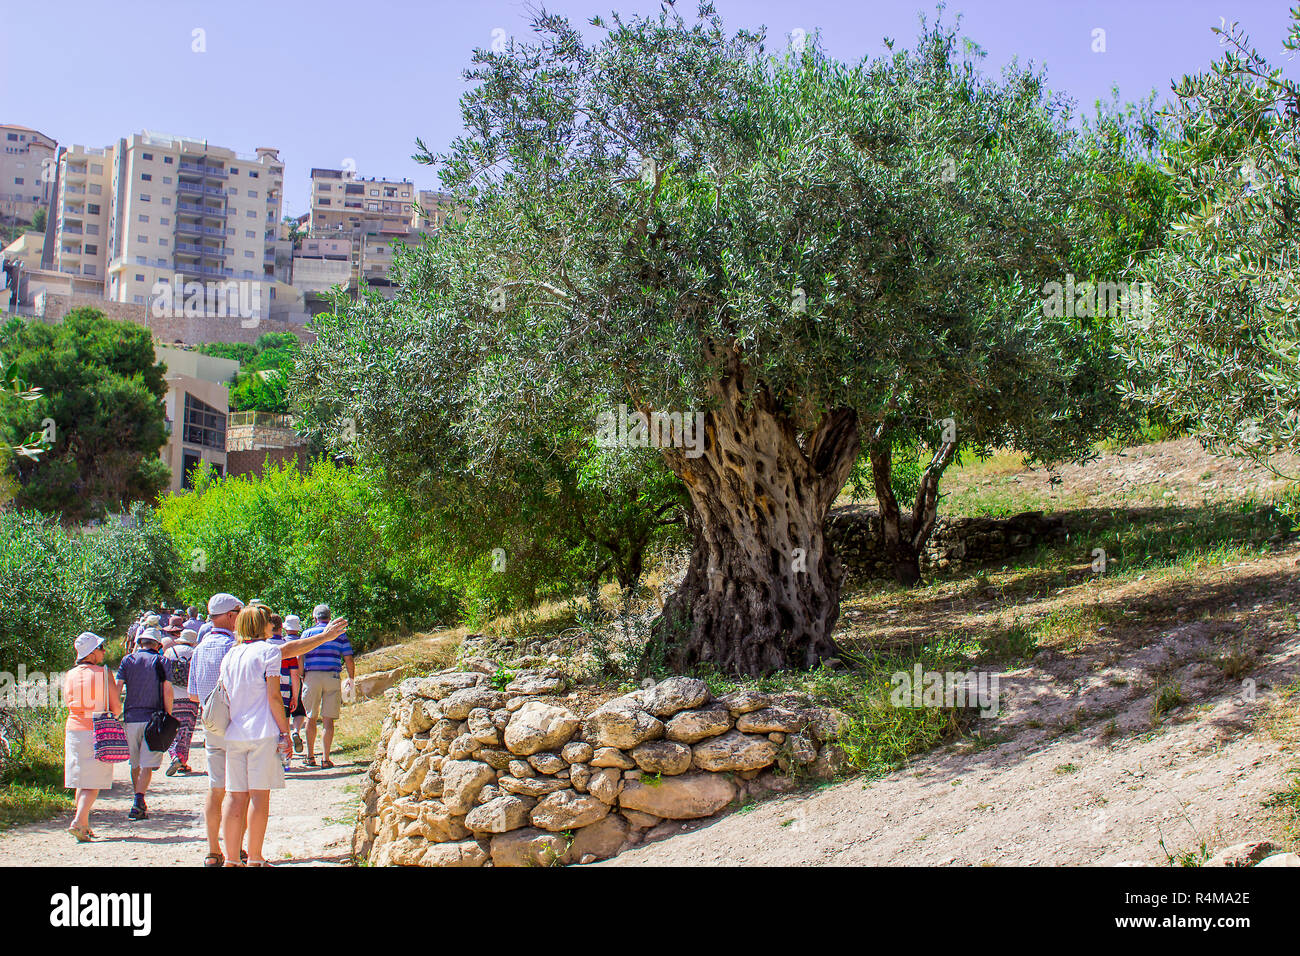 Tourists examine an ancient Olive Tree on a terrace in Nazareth Village Israel in the open air museum of Nazareth Village Israel. This site provides a Stock Photo